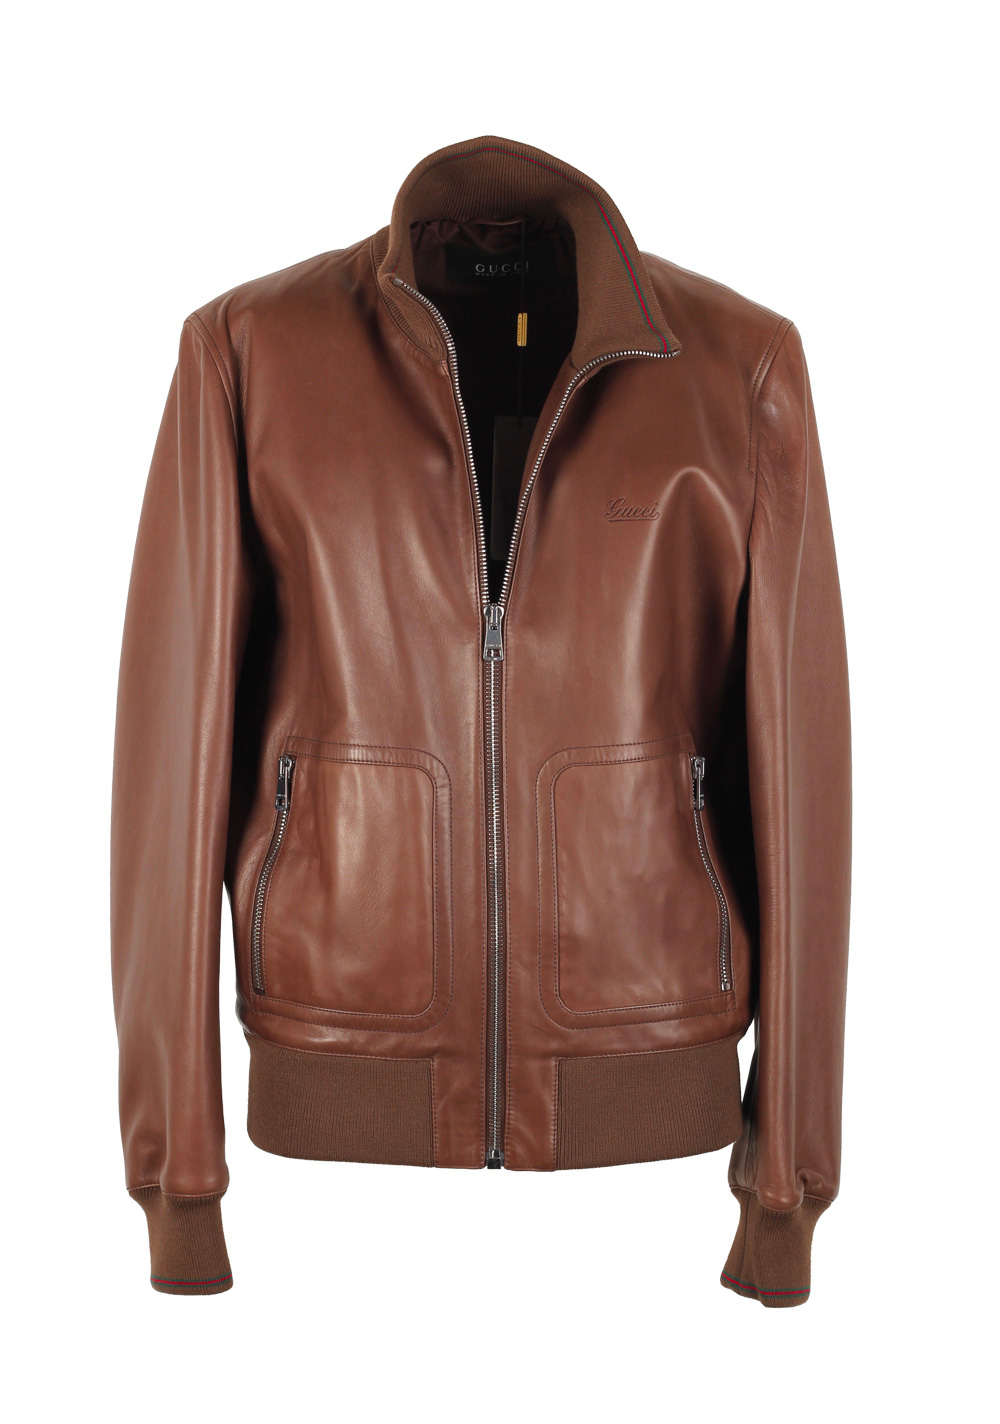 Gucci Brown Nappa Leather Bomber Jacket Coat Size 56 / 46R U.S. | Costume Limité